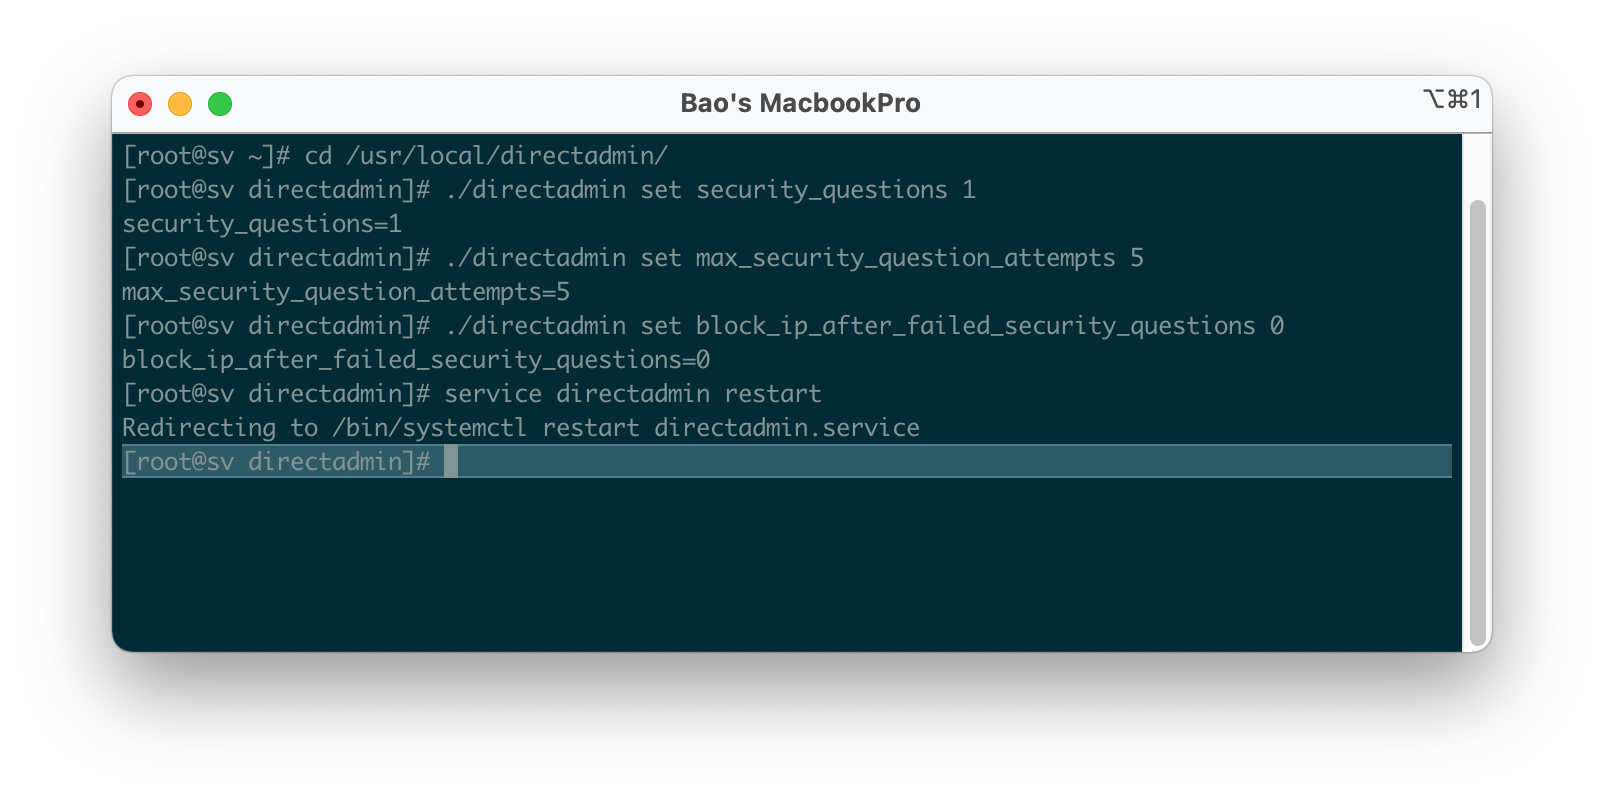 turn-on-feature-bat-security-questions-tren-directadmin